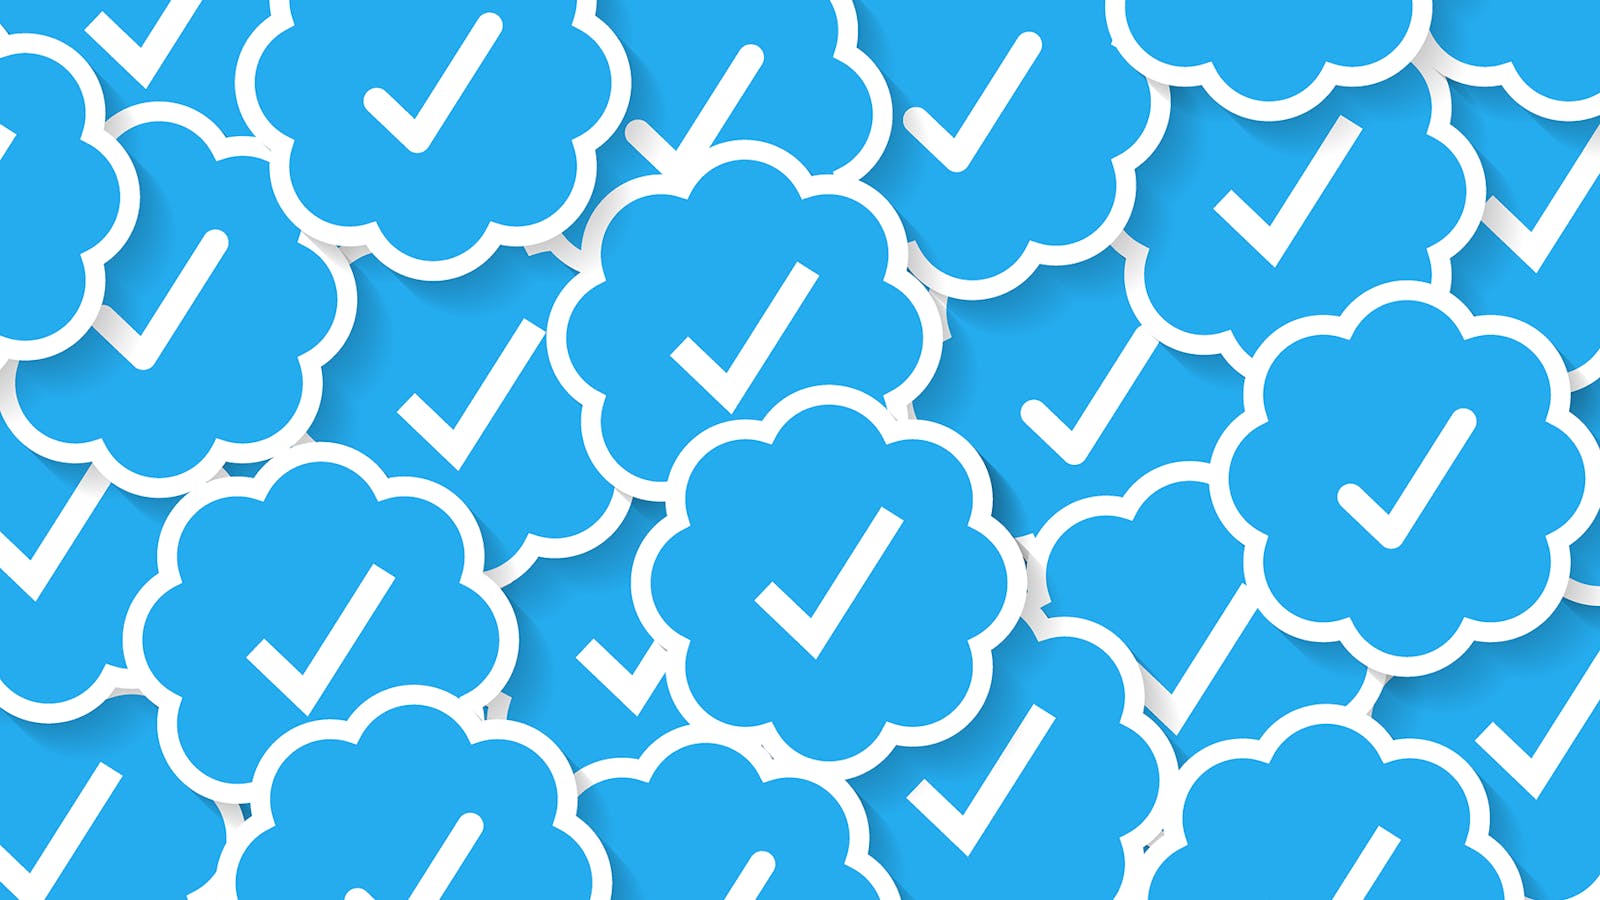 What features come with being a verified account on Twitter? - Quora